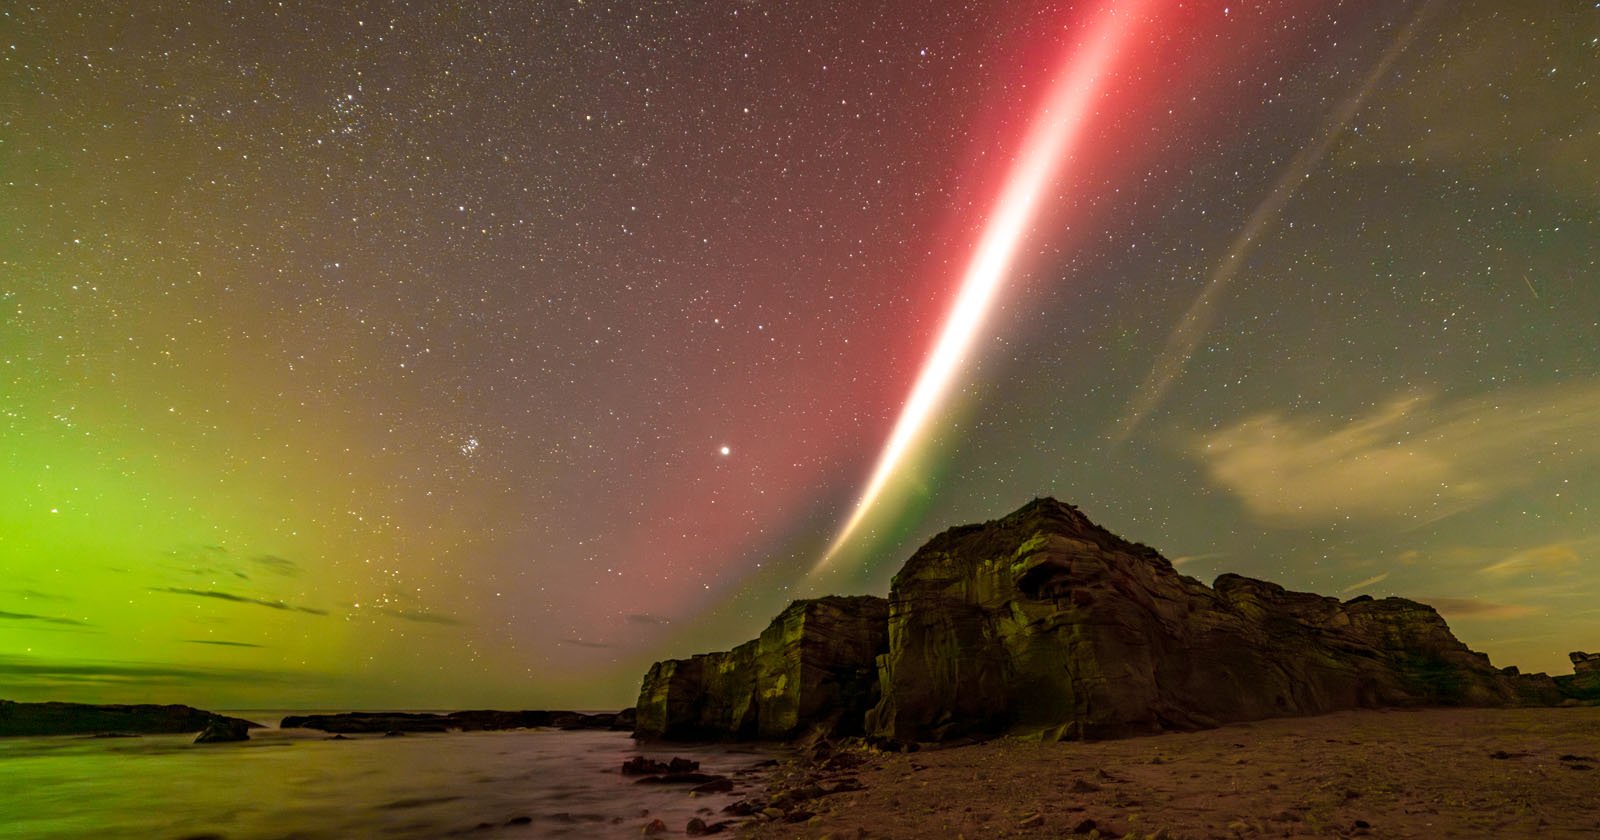 How a Photographer Captured Aurora, STEVE, and the Milky Way in One Shot